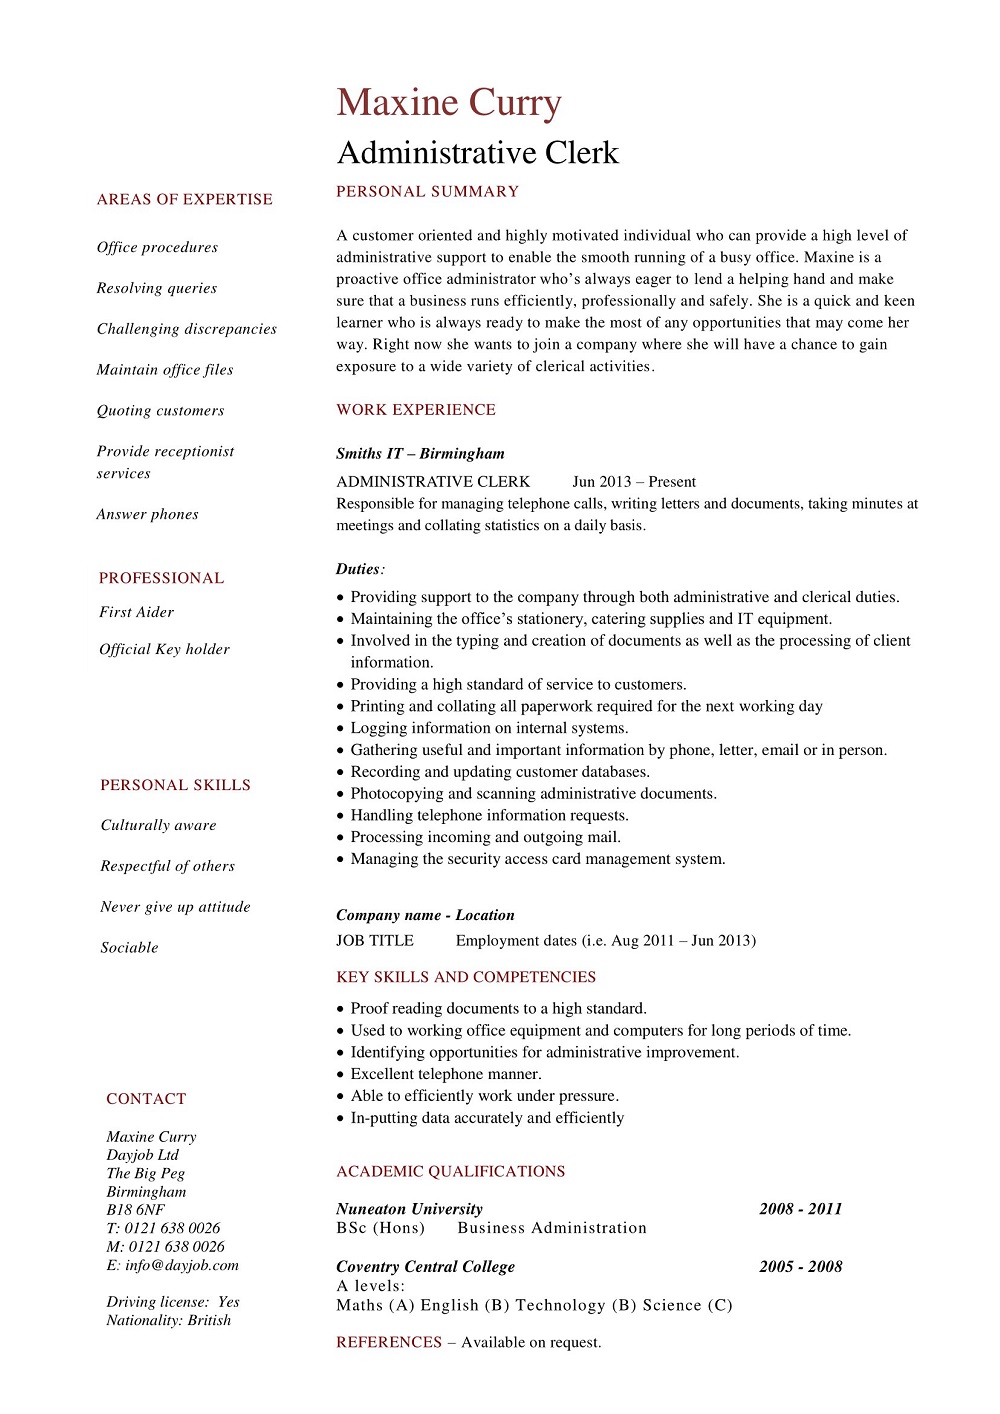 28+ Free Administrative Resume Samples & Templates - MS Word, PDF ...